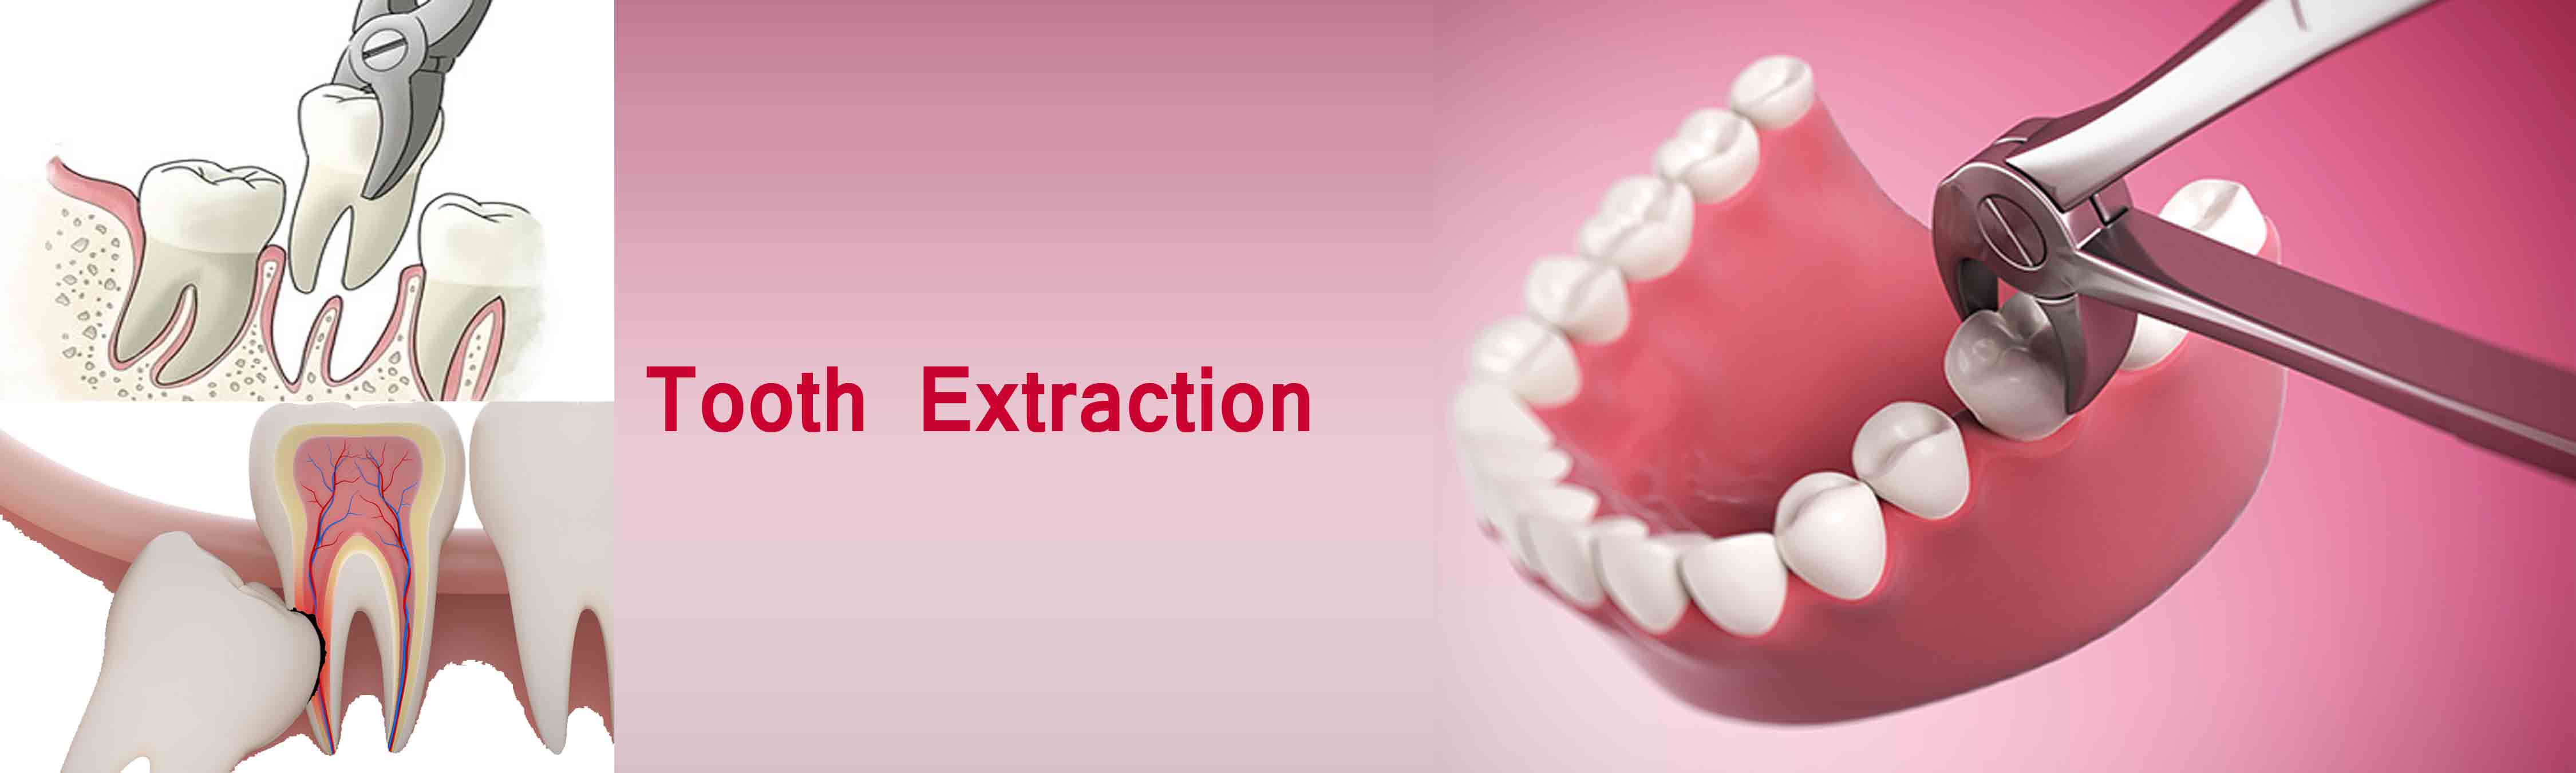 tooth-extraction-slide